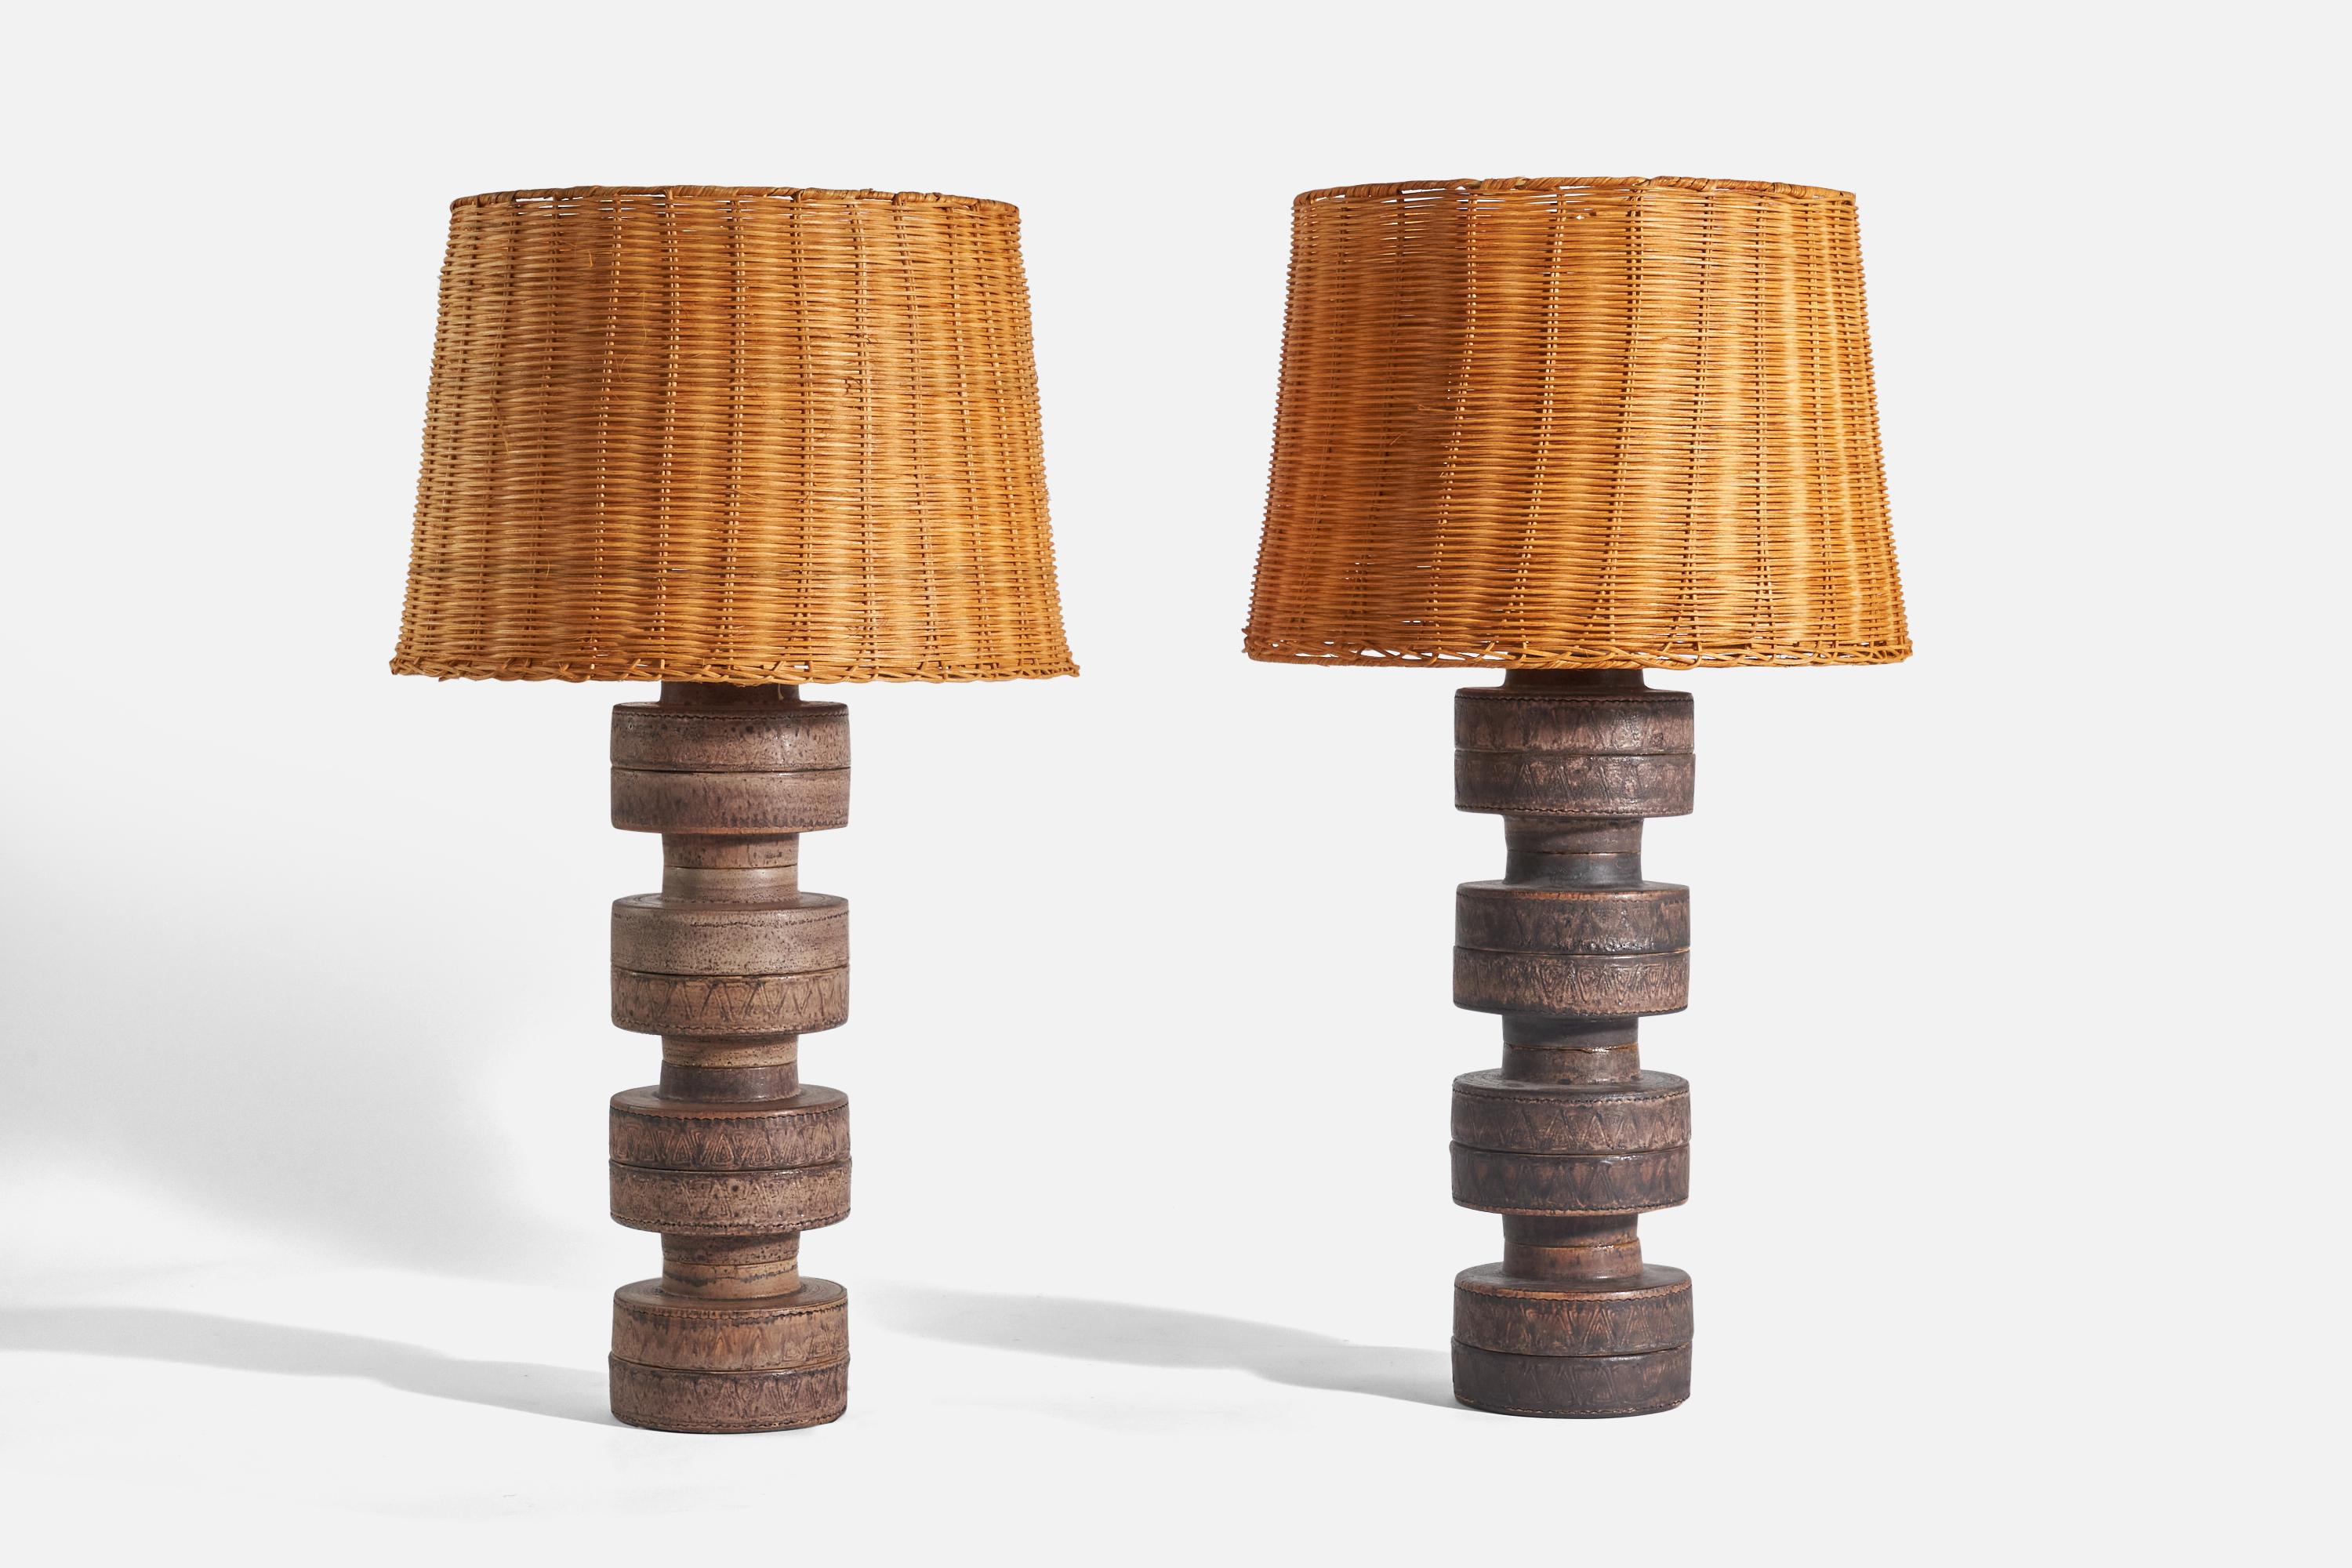 A pair of brown ceramic and rattan table lamps designed and produced in Italy, 1960s. 

Sold with Lampshade(s)
Dimensions of Lamp (inches) : 21.25 x 5.9 x 5.9 (Height x Width x Depth)
Dimensions of Shade (inches) : 13.75 x 16.75 x 11.5 (Top